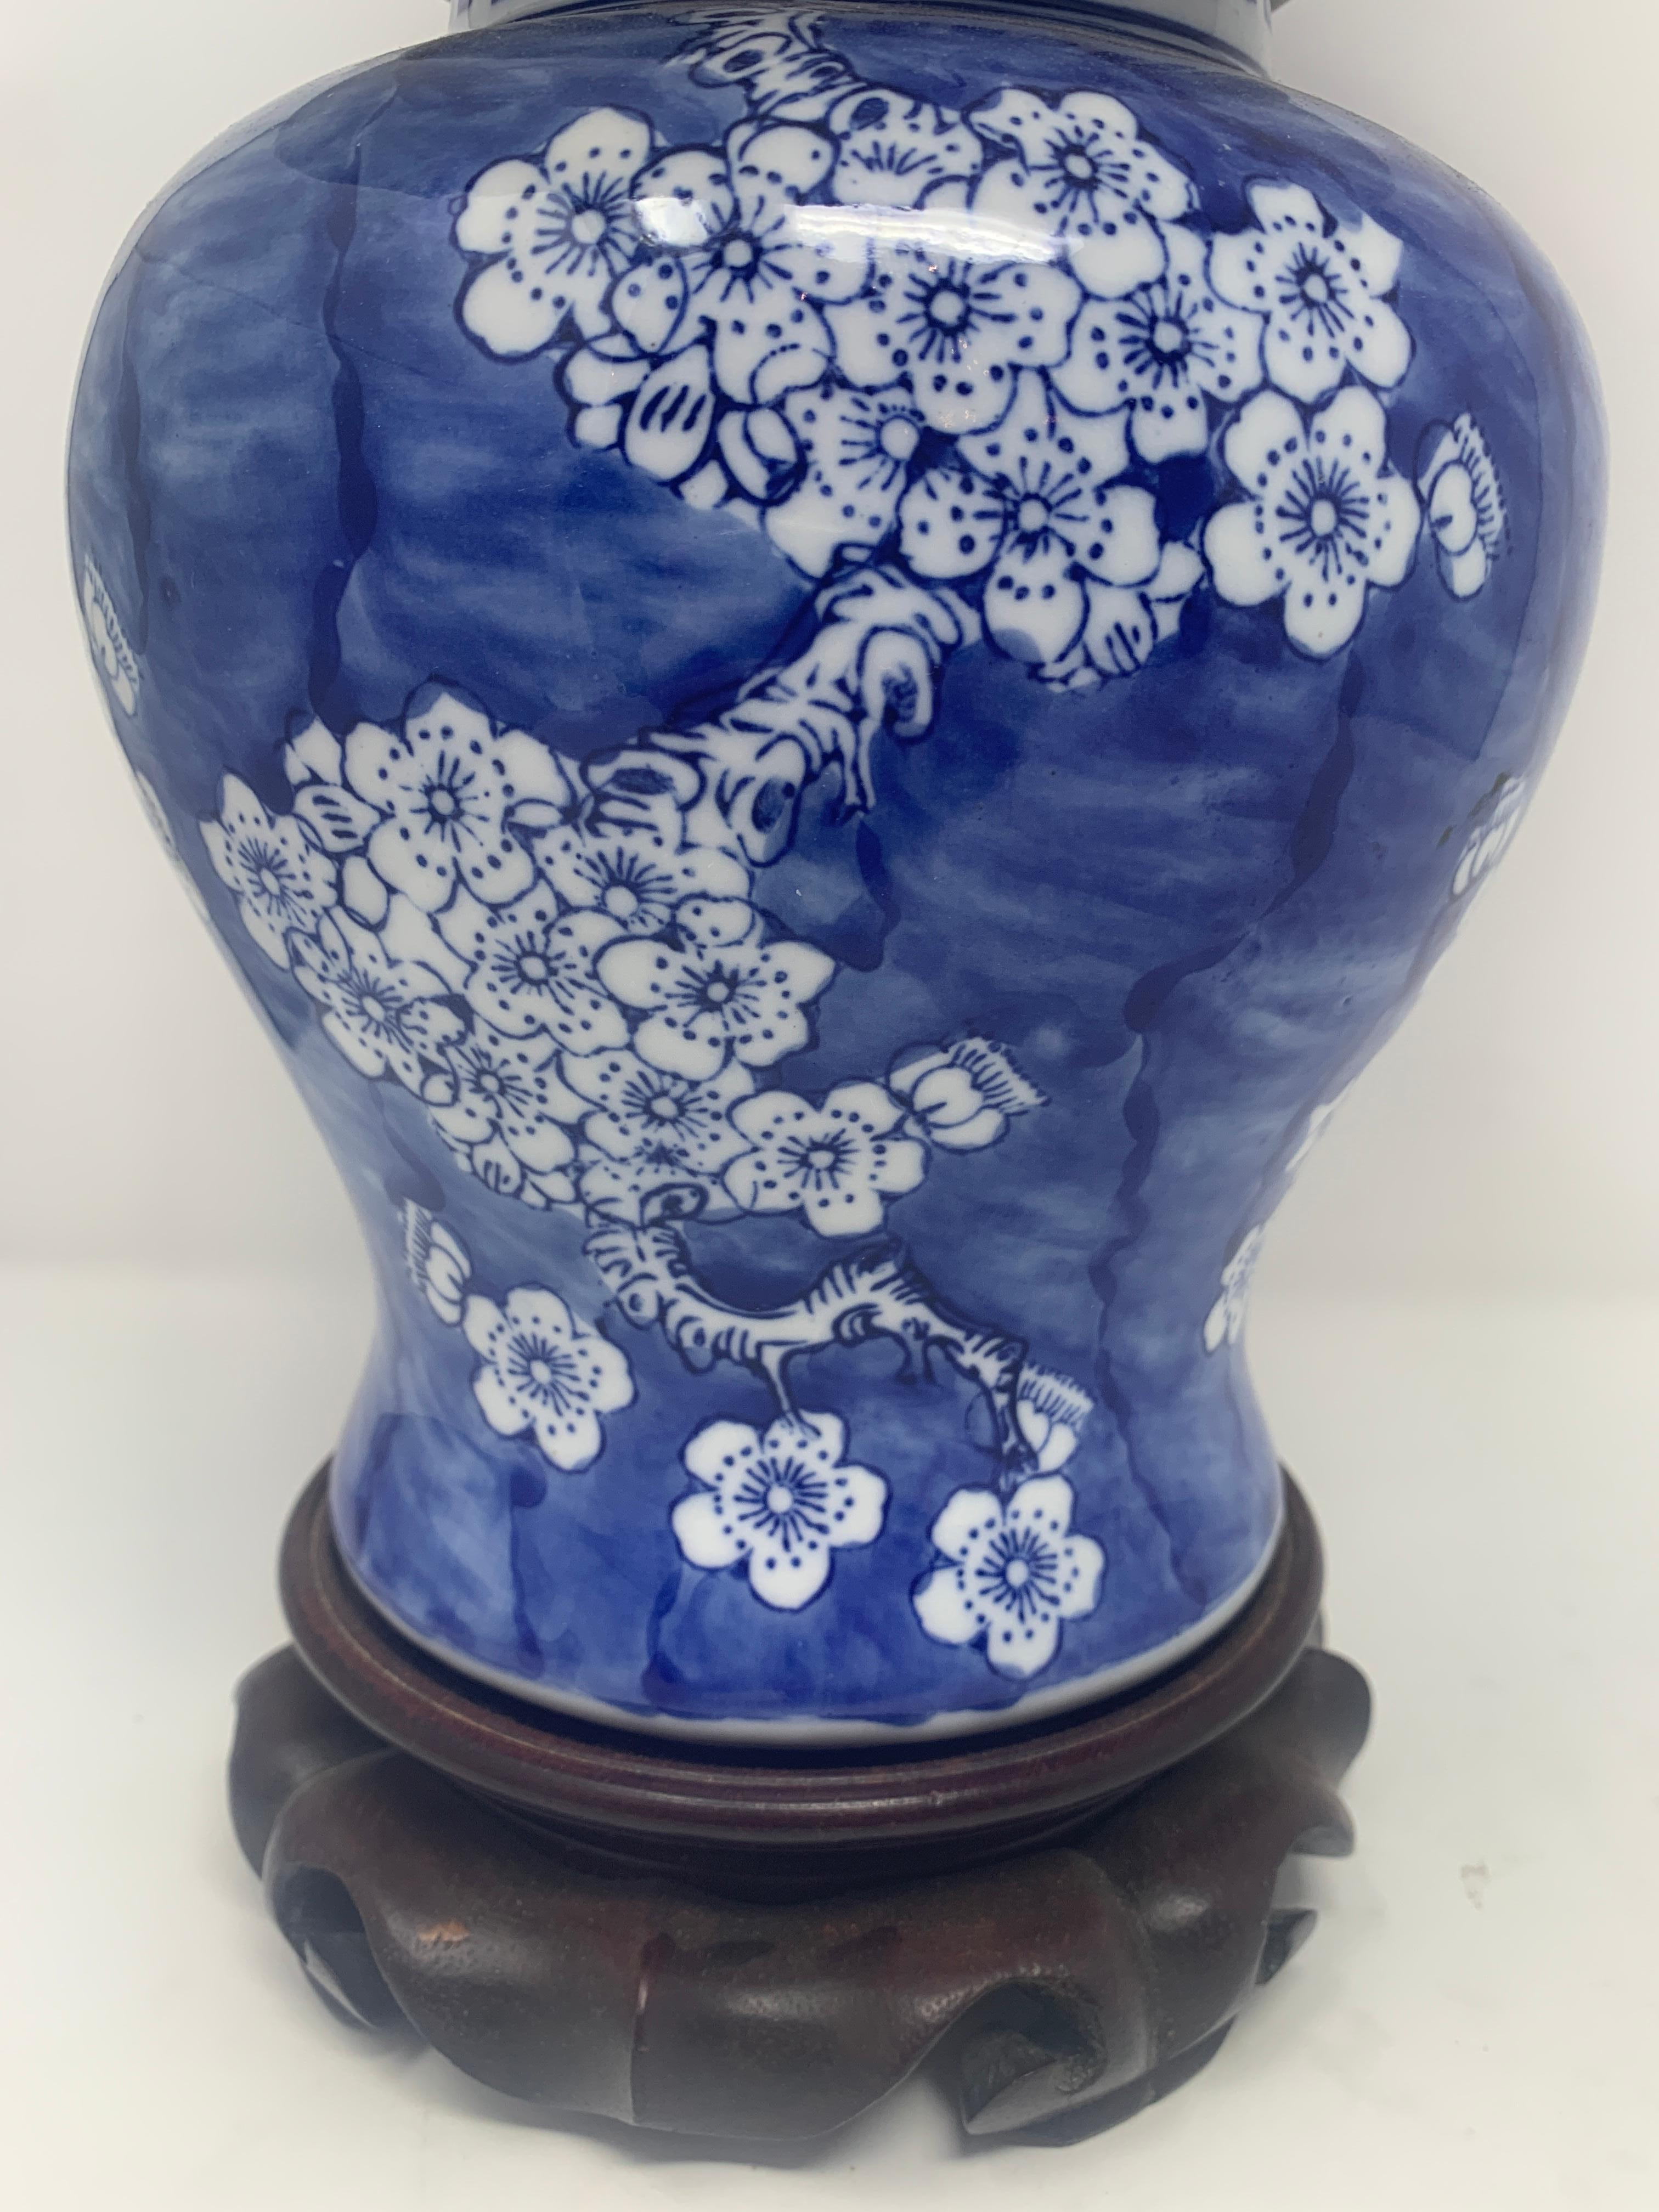 Early 20th Century Antique Chinese Blue and White Porcelain Urn Made into a Lamp, circa 1910